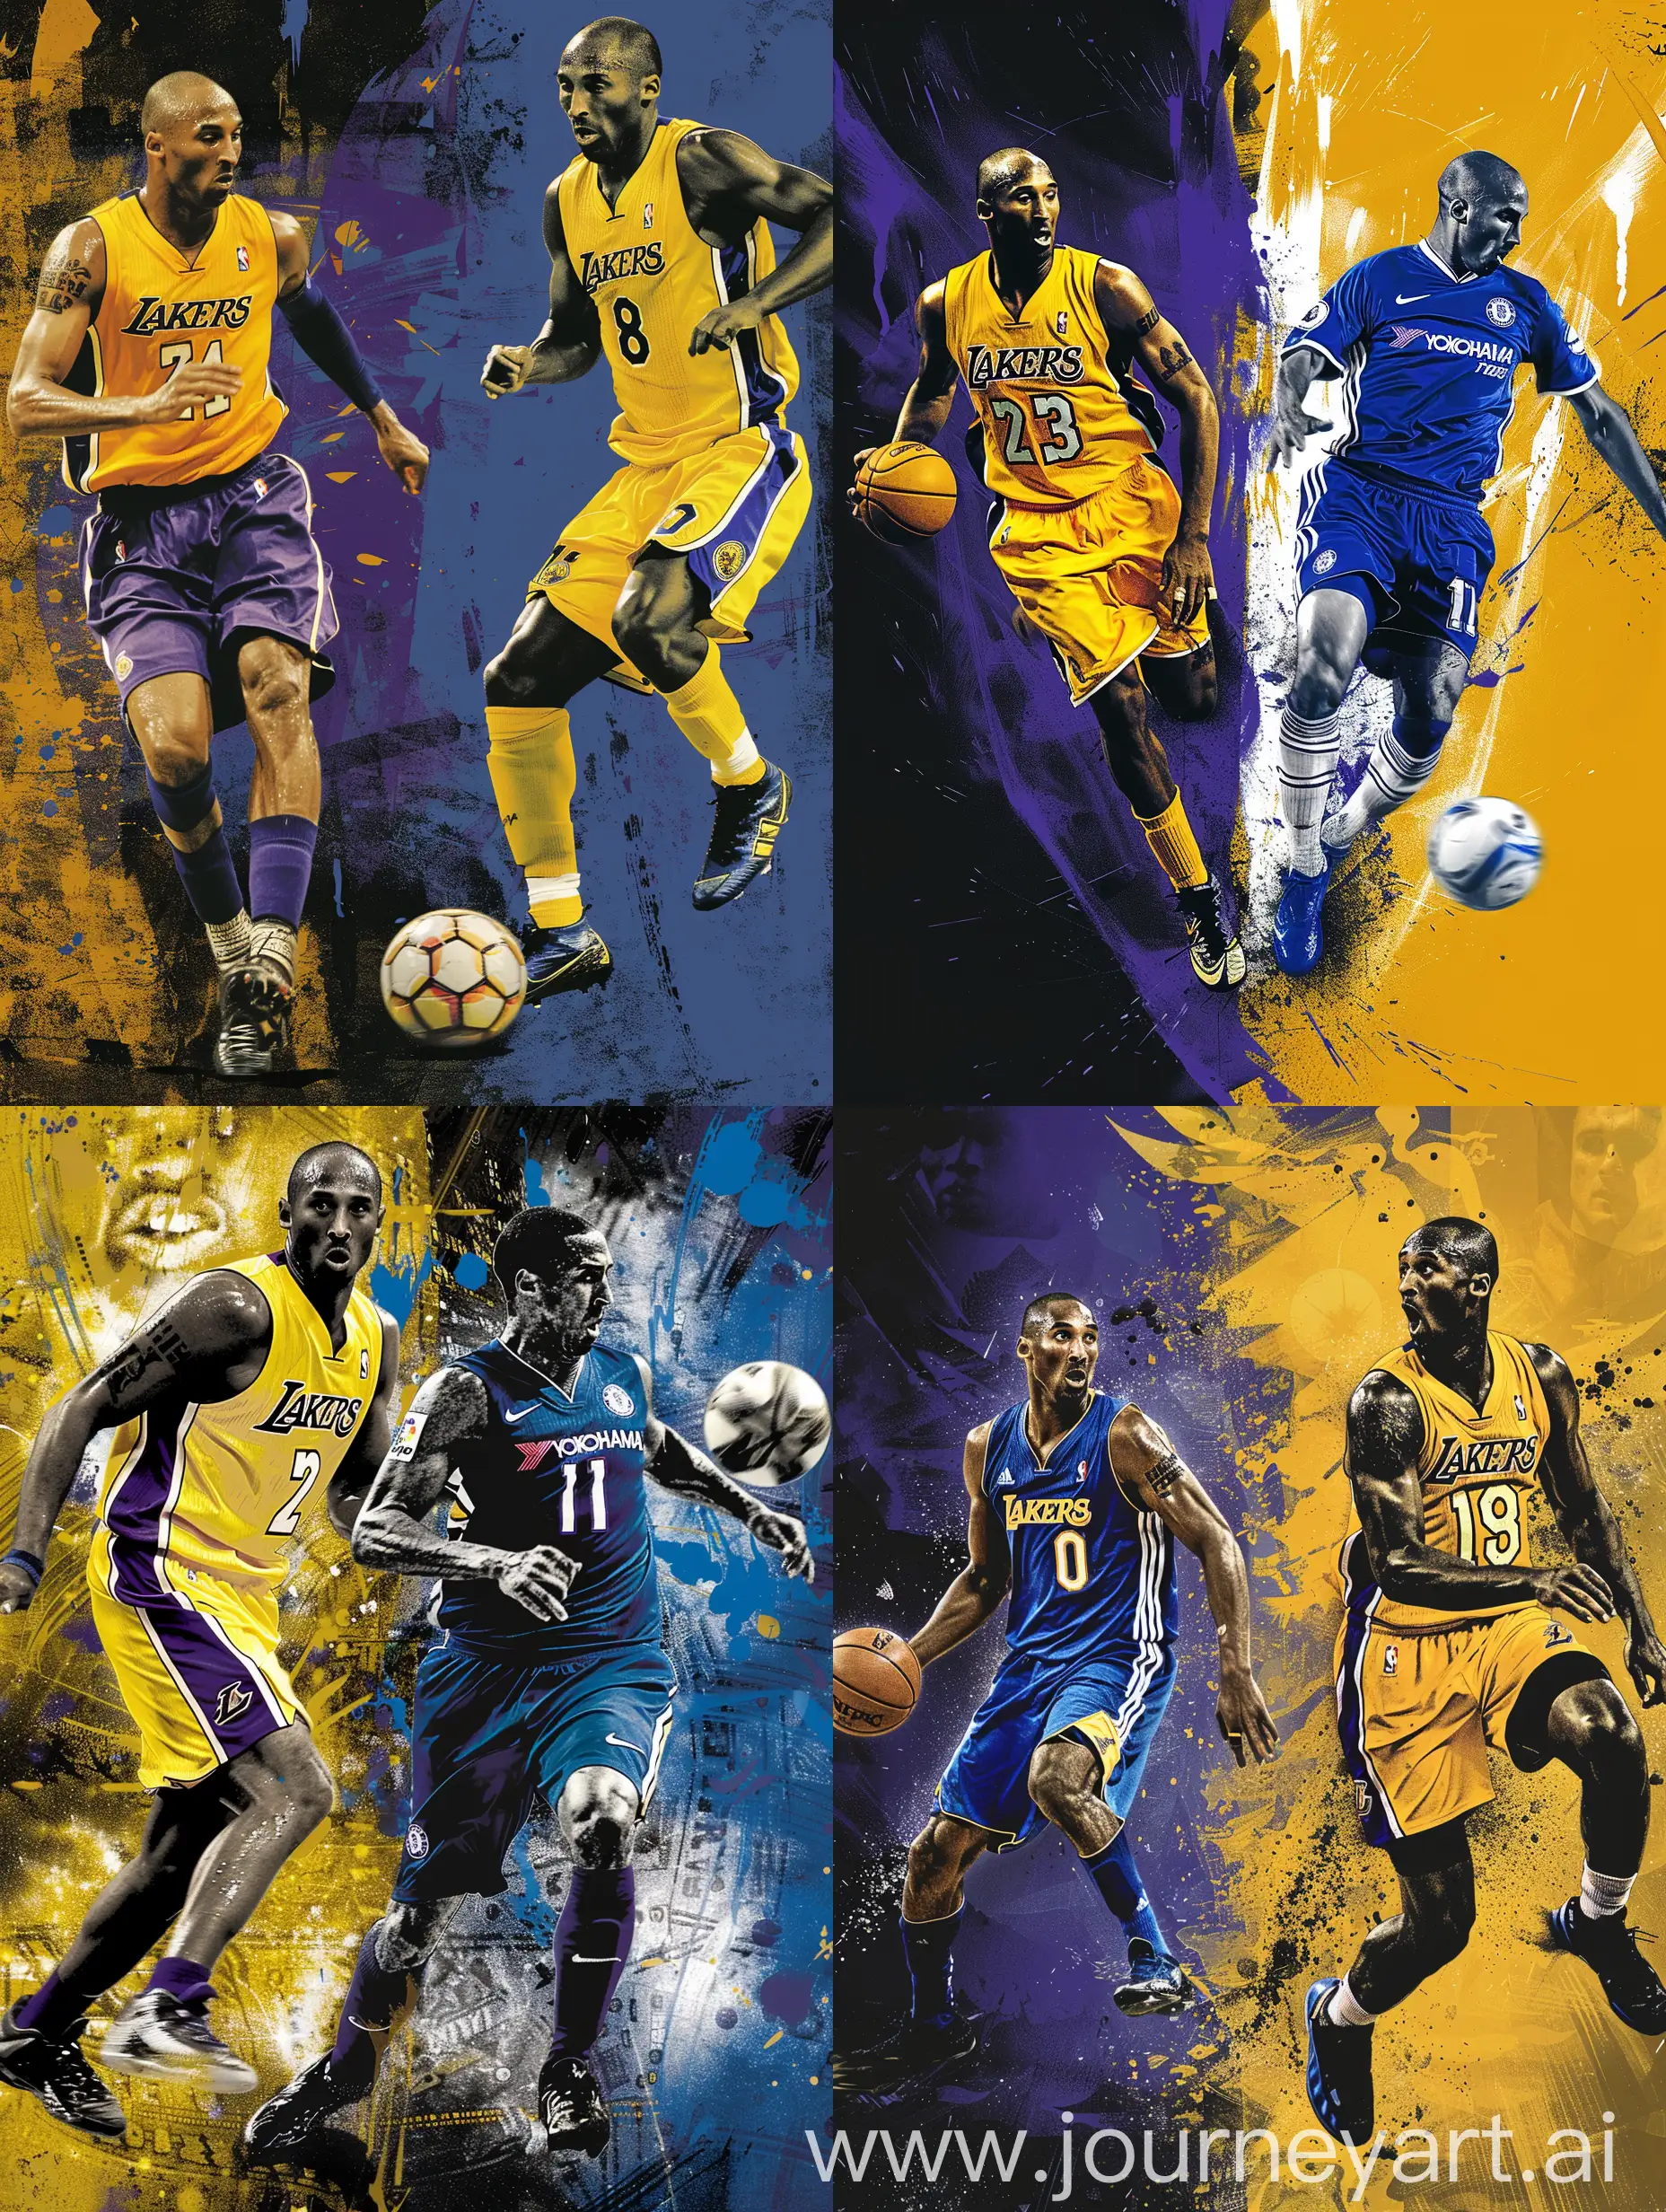 Kobe Bryant in the shooting on a black and yellow background with purple and the Lakers logo on the left, Frank Lampard kicking the ball on a blue background and the Chelsea logo on the right